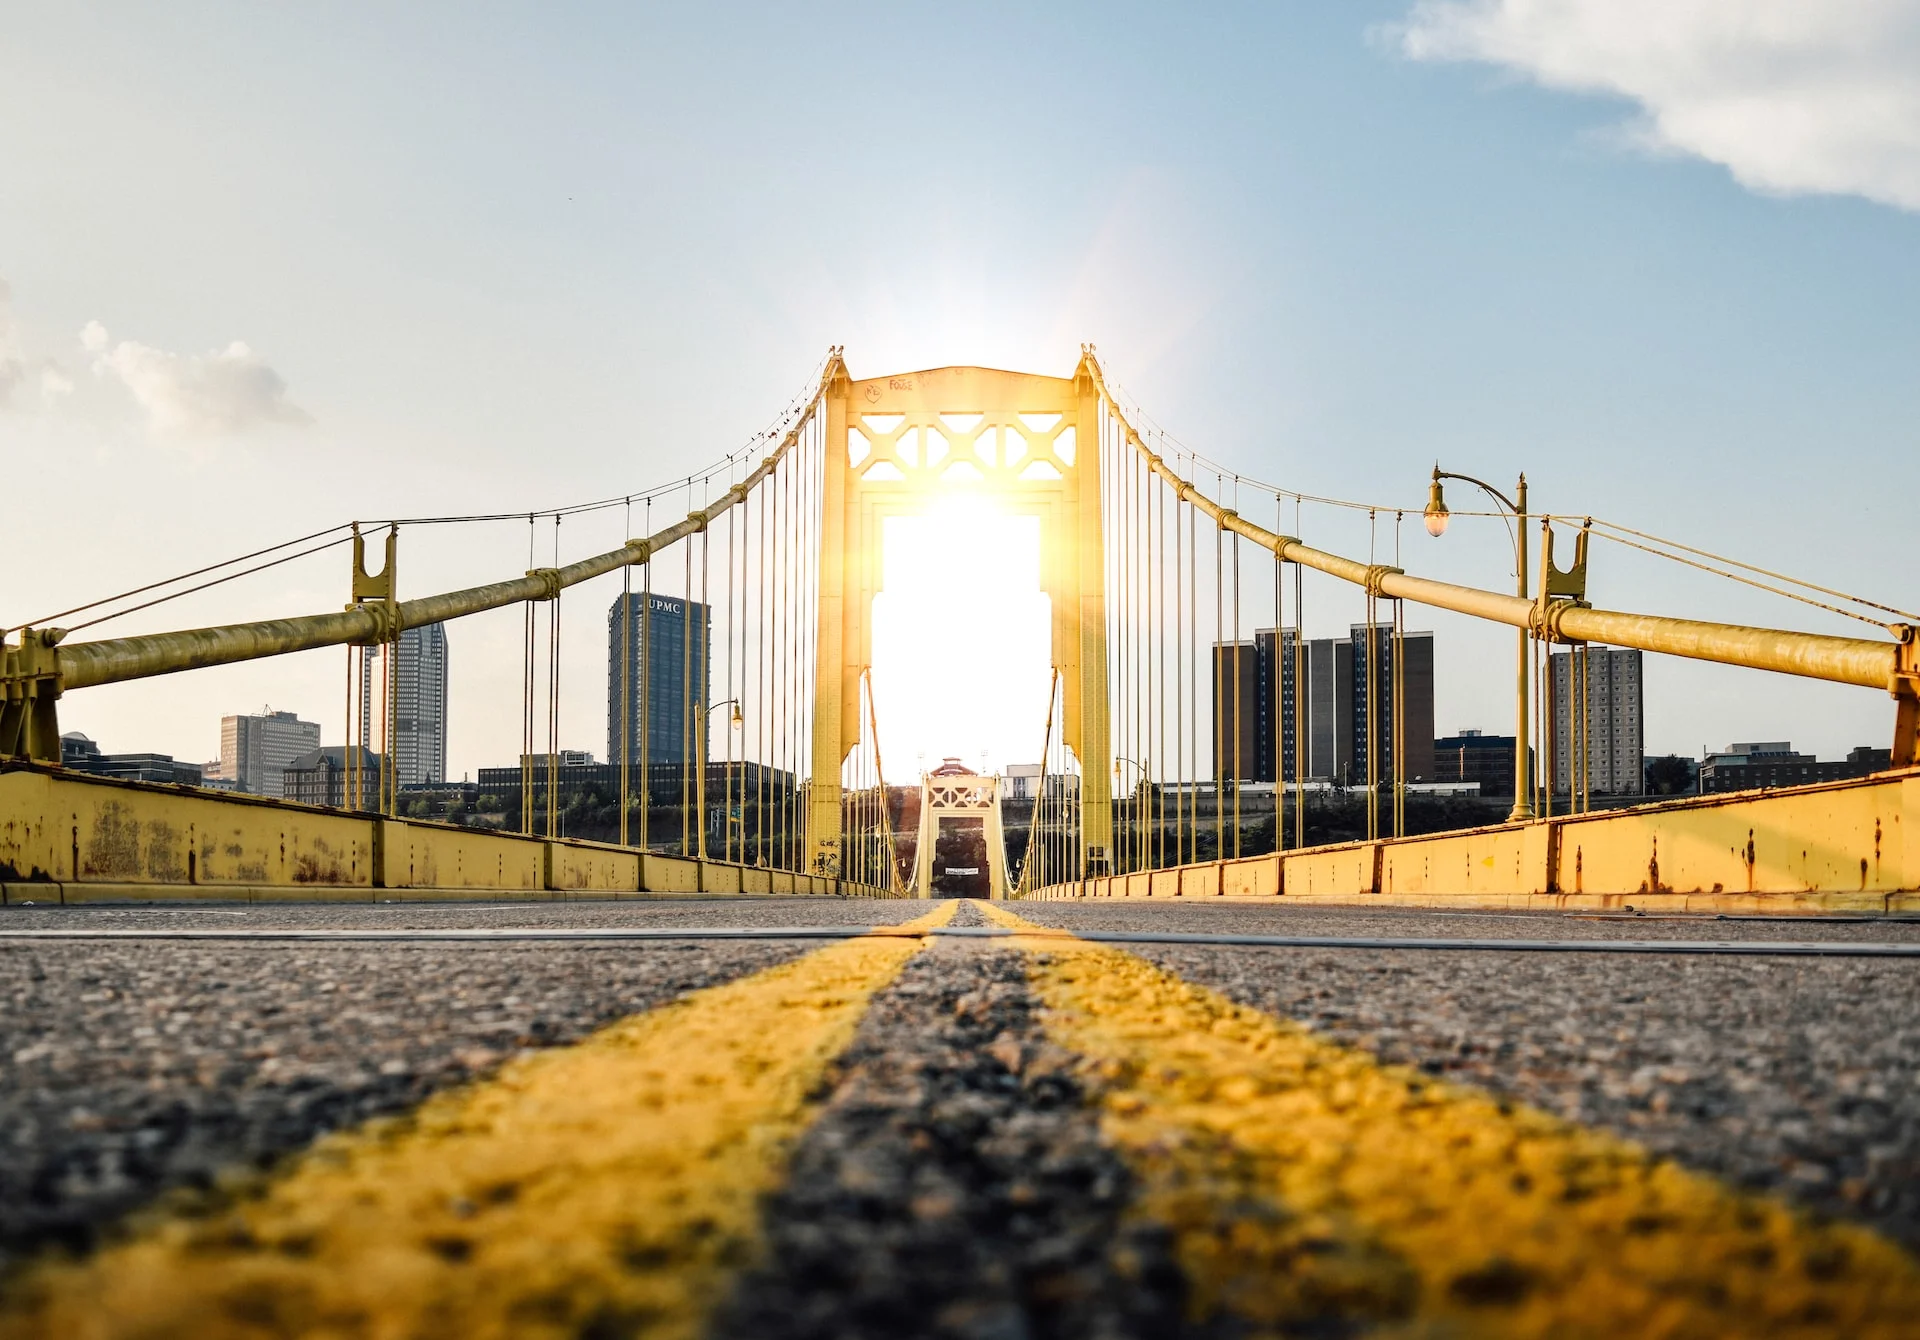 Pennsylvania laws outline the rights and duties of each form of travel. However, car accidents still happen between two or more vehicles, automobiles and pedestrians, and motors and cyclists.